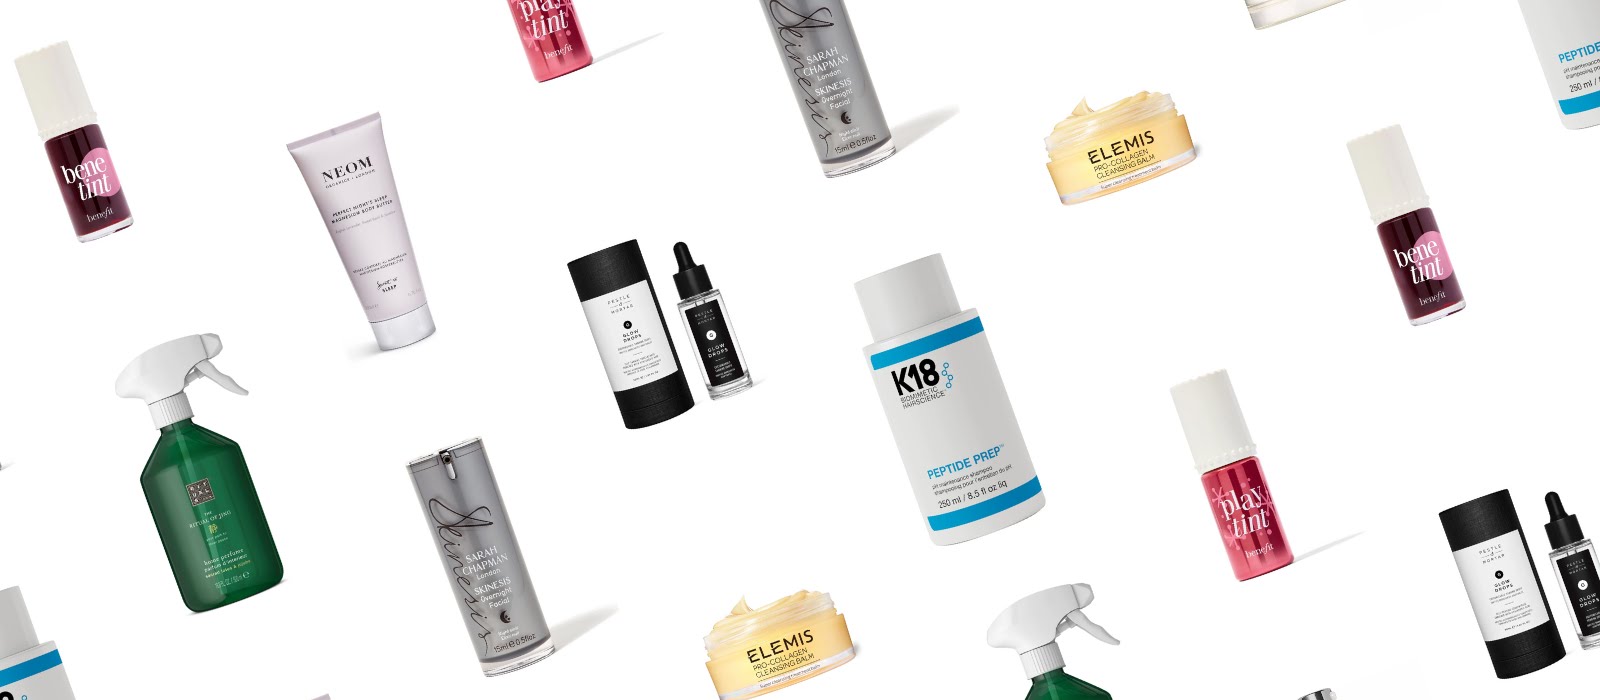 Where to get the best discounts on the viral beauty products that live up to the hype